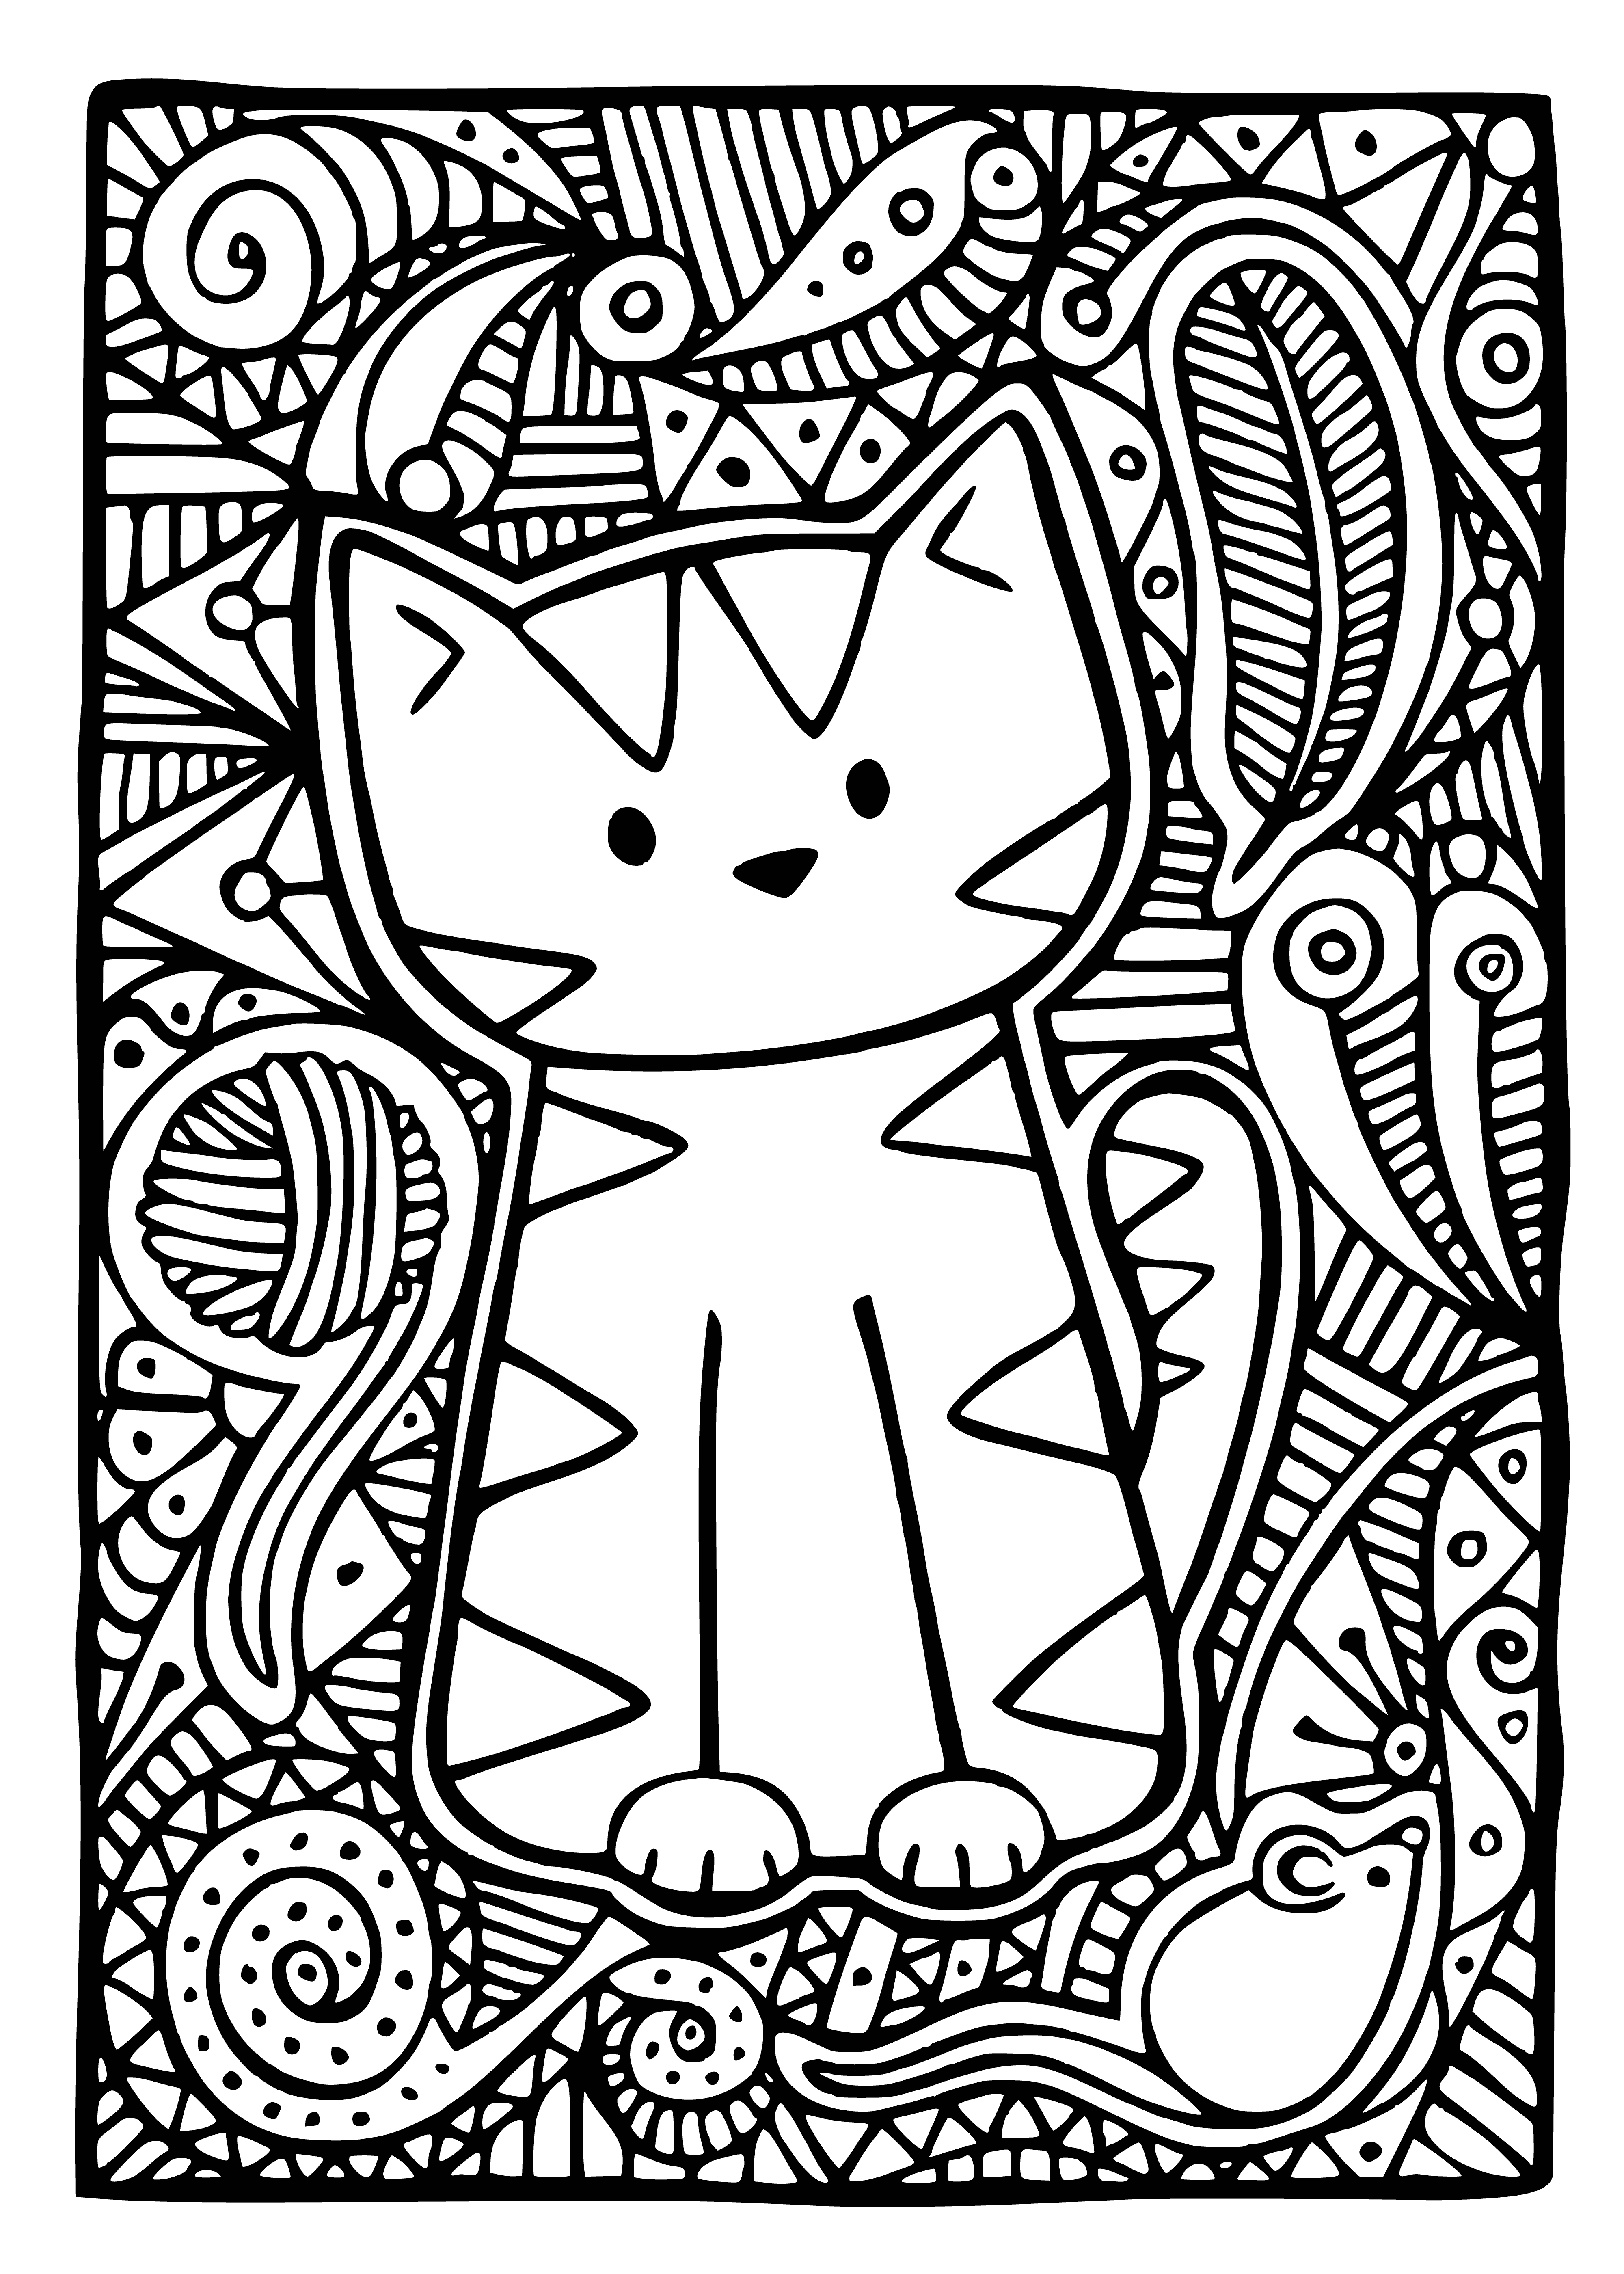 coloring page: Cute kitten in center of page looking left w/ light brown fur, black spots, raised right paw, white chest. #coloring pagegraphy